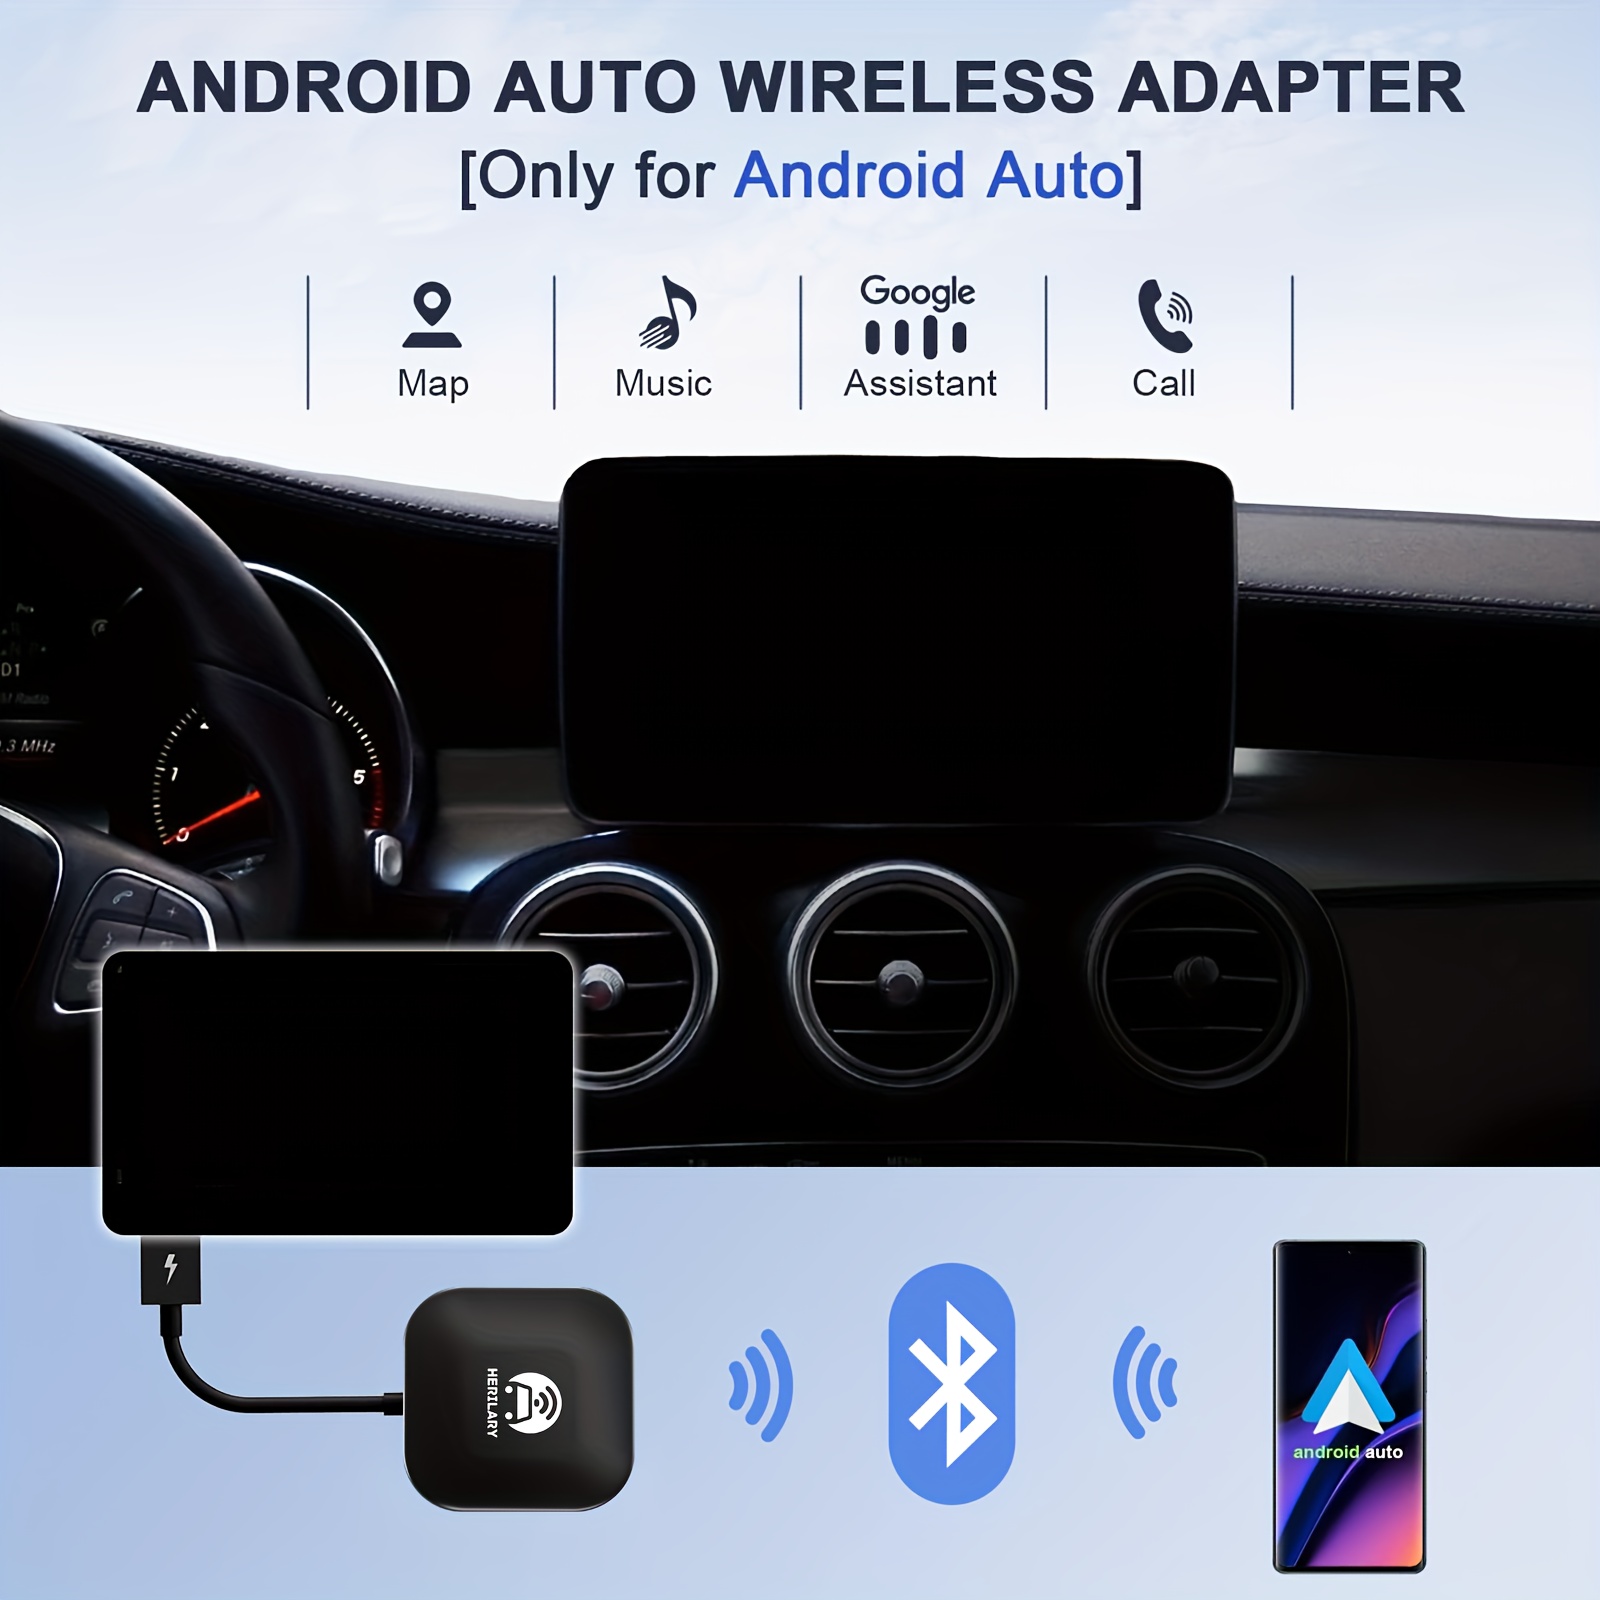 2-in-1 Wireless Apple CarPlay & Android Auto Wireless Adapter, 5.8 GHz  Wireless AA Wireless Carplay Dongle for Wired Apple Carplay & Android Car